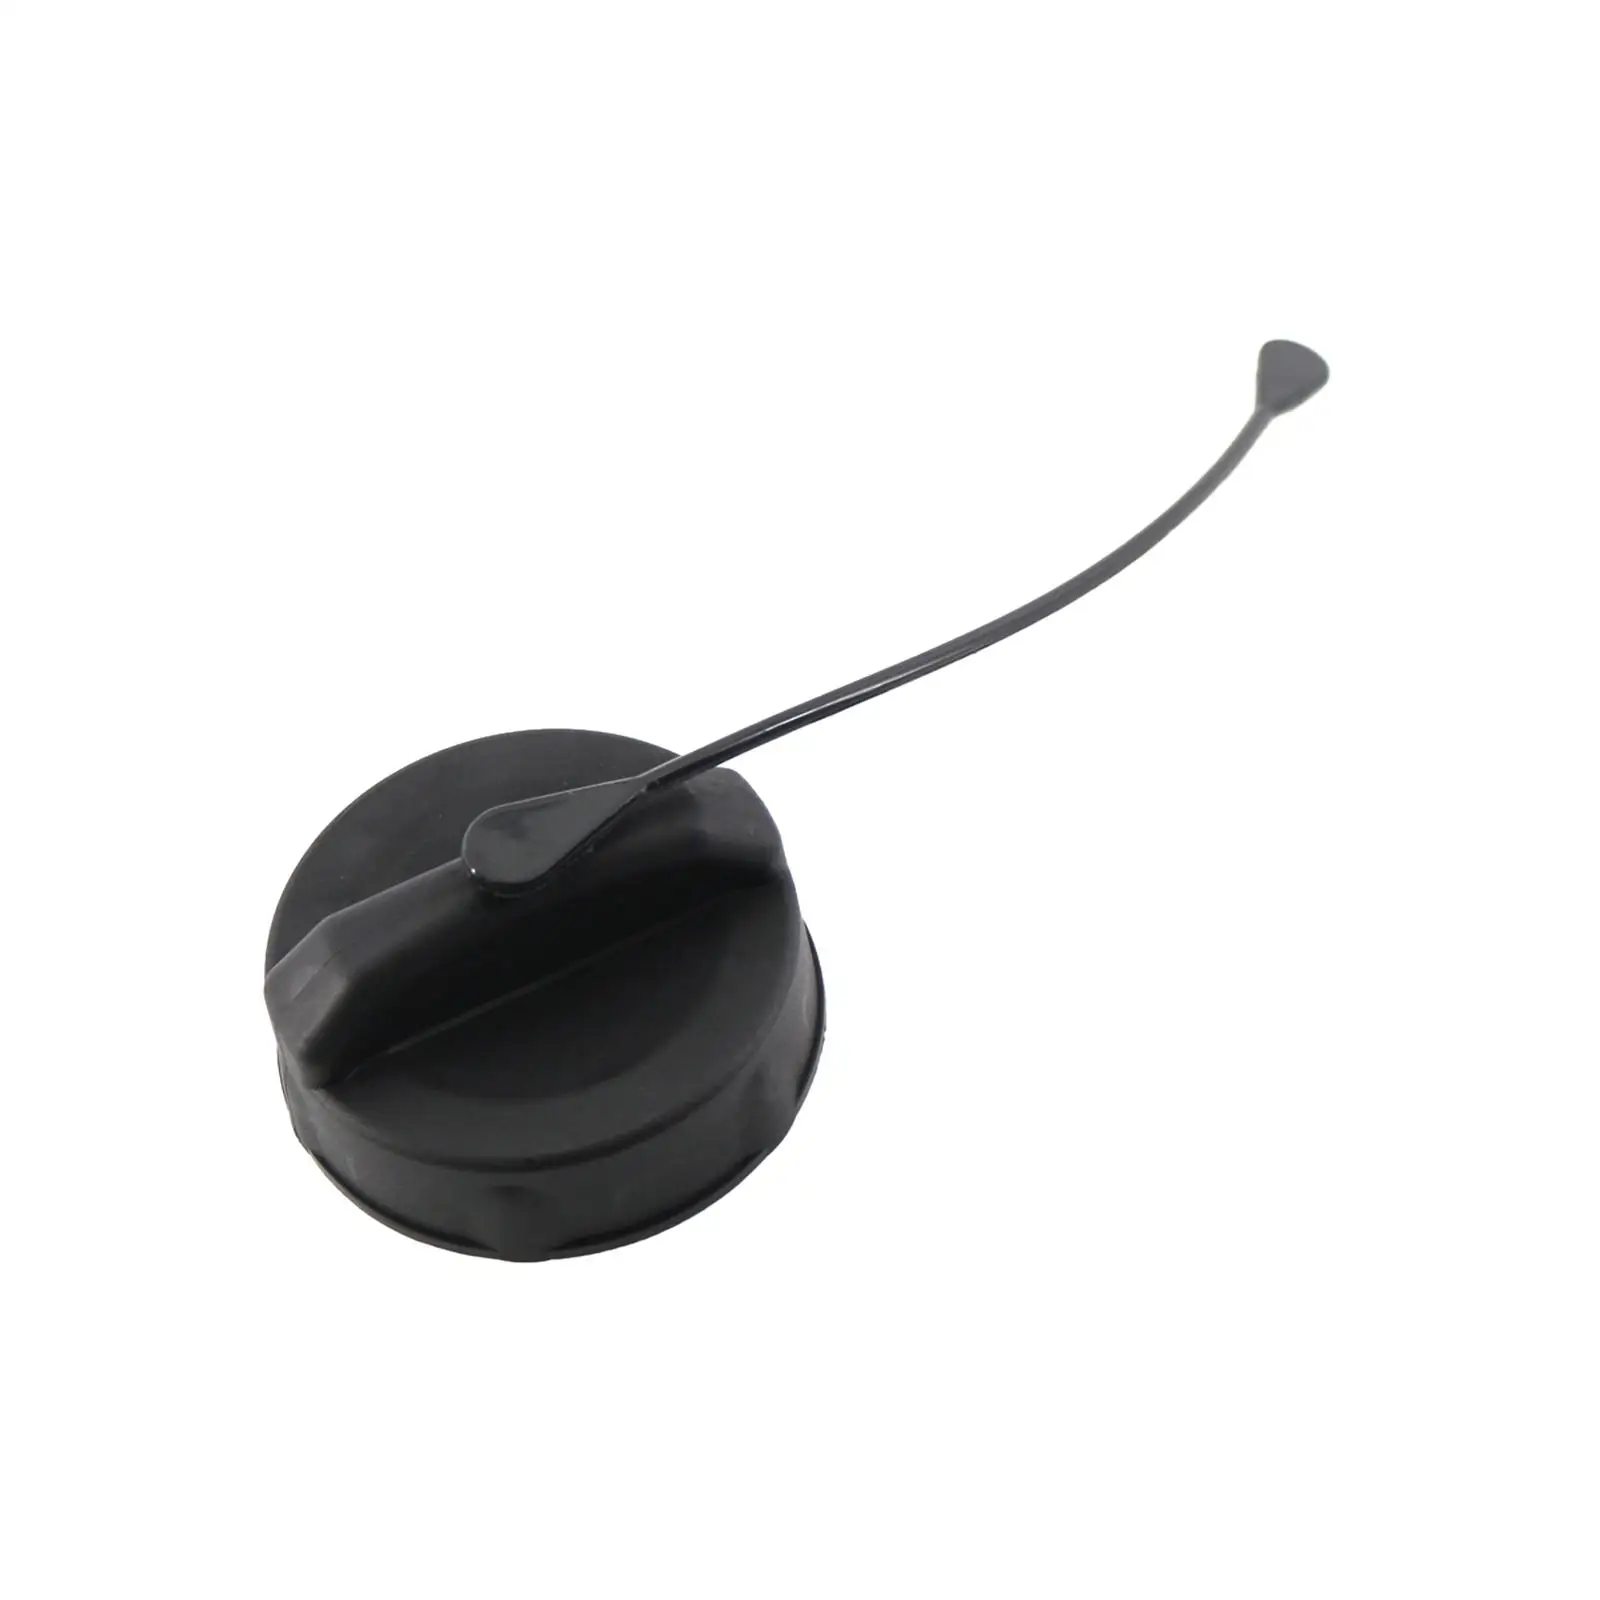 Vehicle Fuel Gas Cap for High Quality Replacement